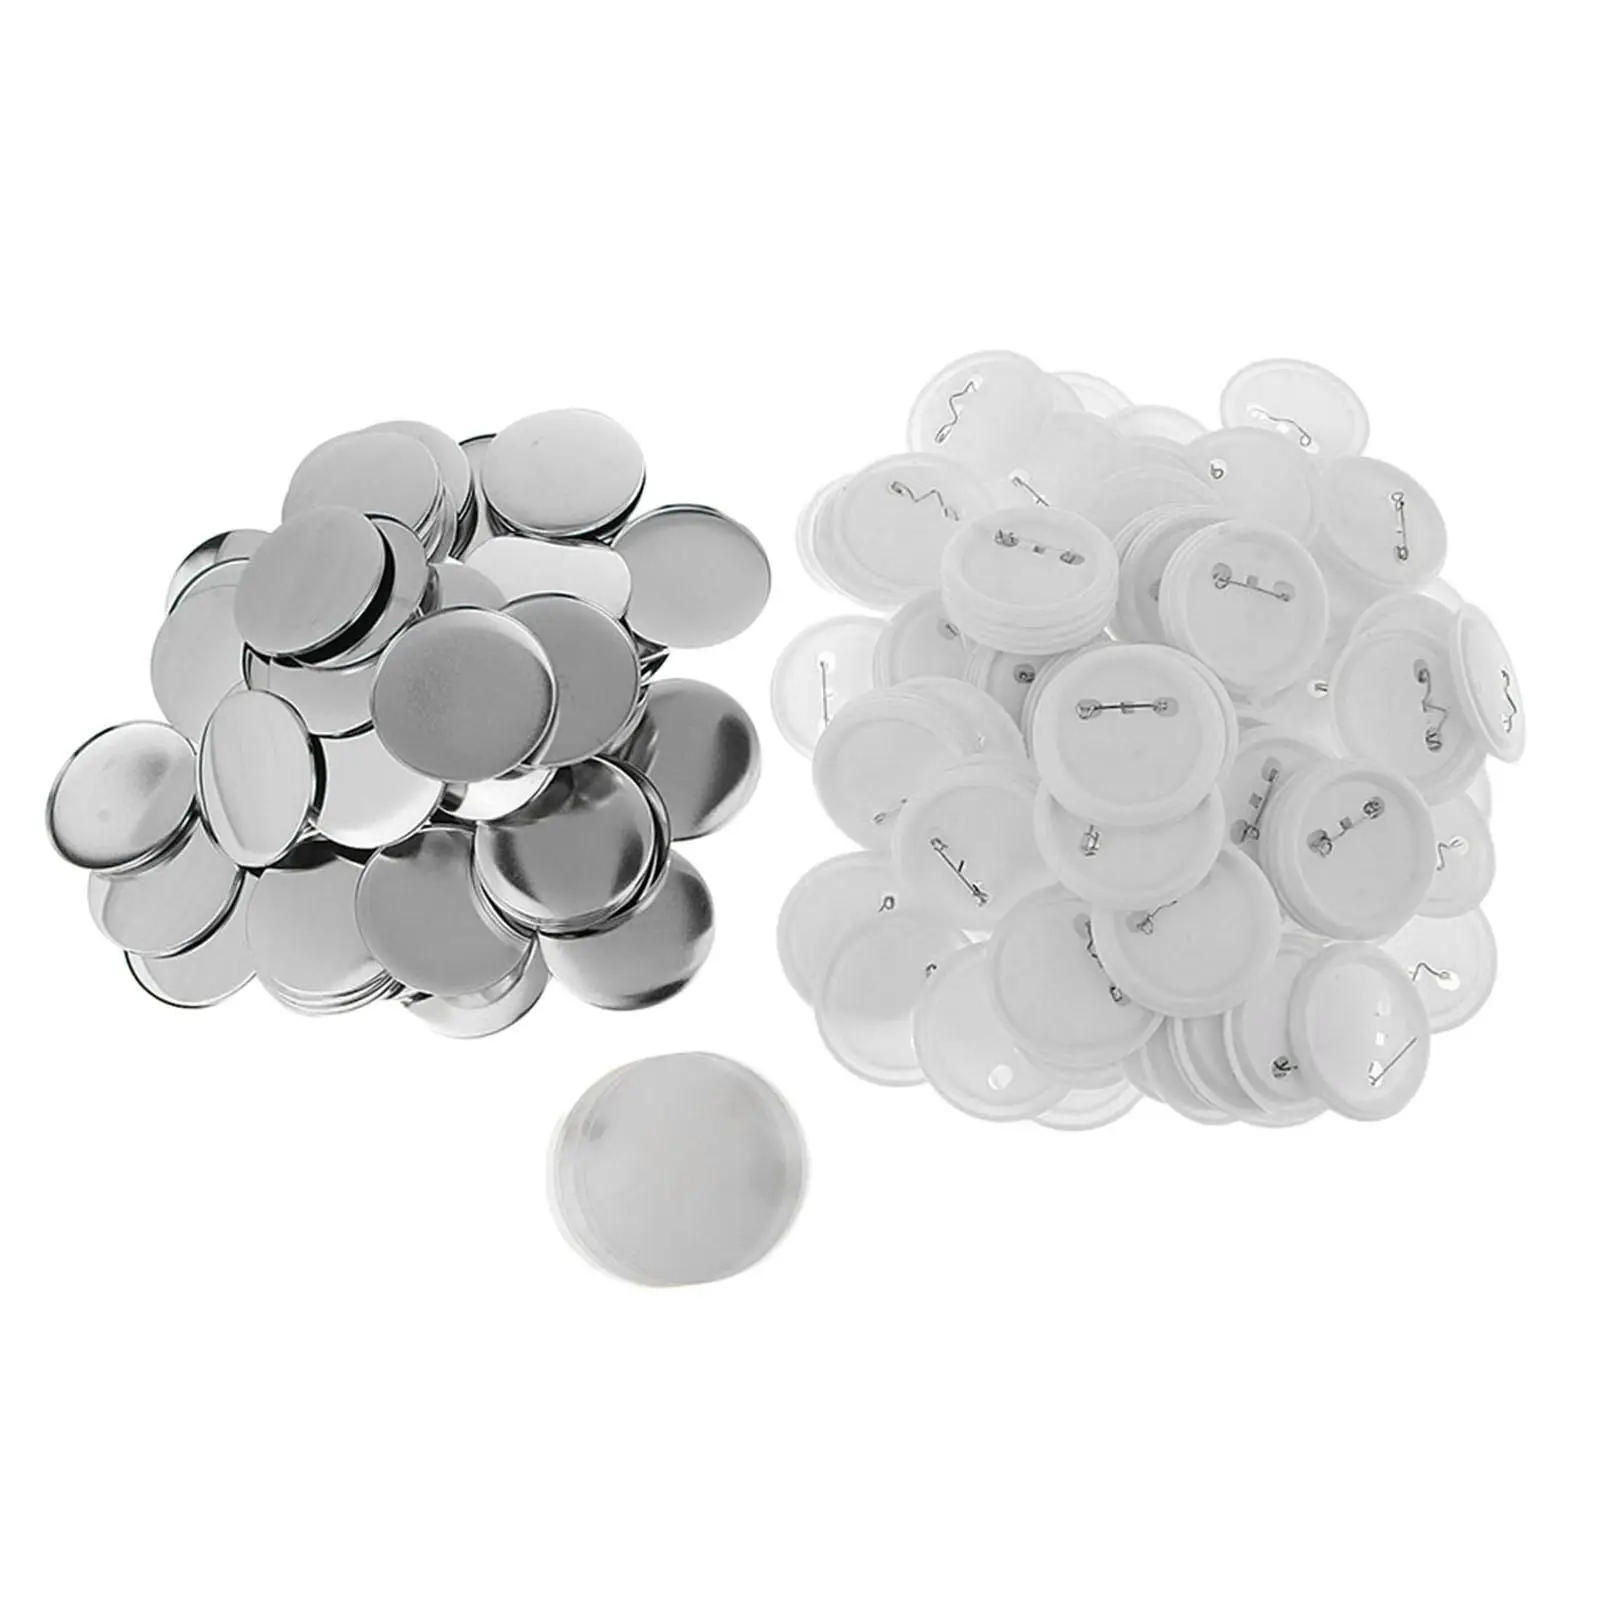 Blank Button Making Supplies 50mm DIY Crafts Metal Button Pin Badge Kit for Button Maker Machine Souvenirs Badge Making Presents